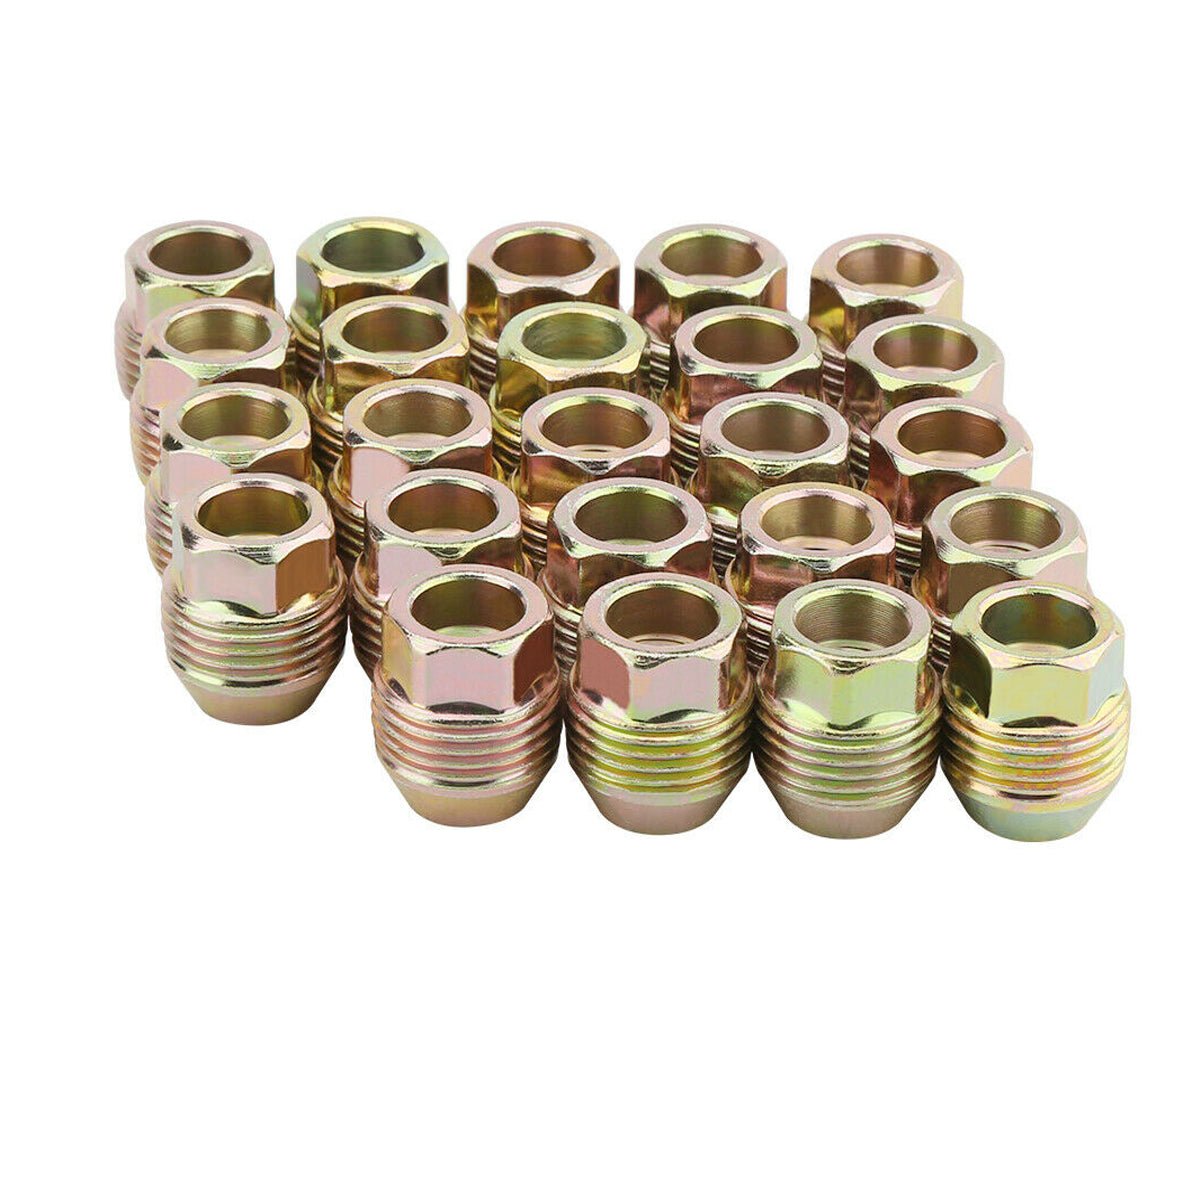 14x1.5 24pcs OEM/Stock/Factory Open End Lug Nuts for Chevy and GMC xccscss.